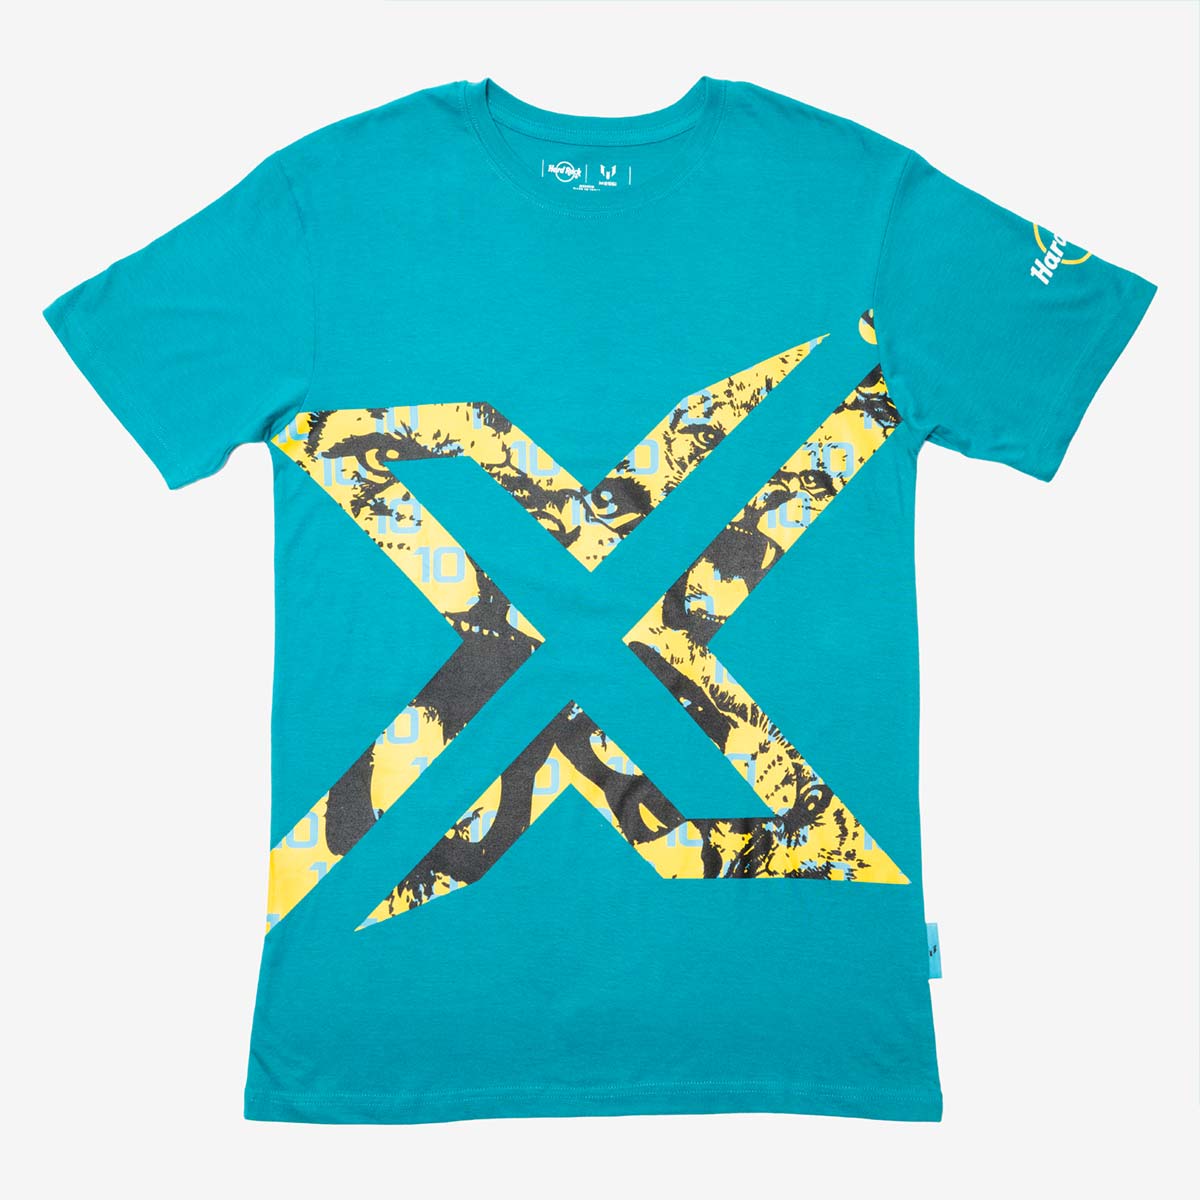 Messi x Hard Rock Adult Fit Crew Tee in Teal image number 2